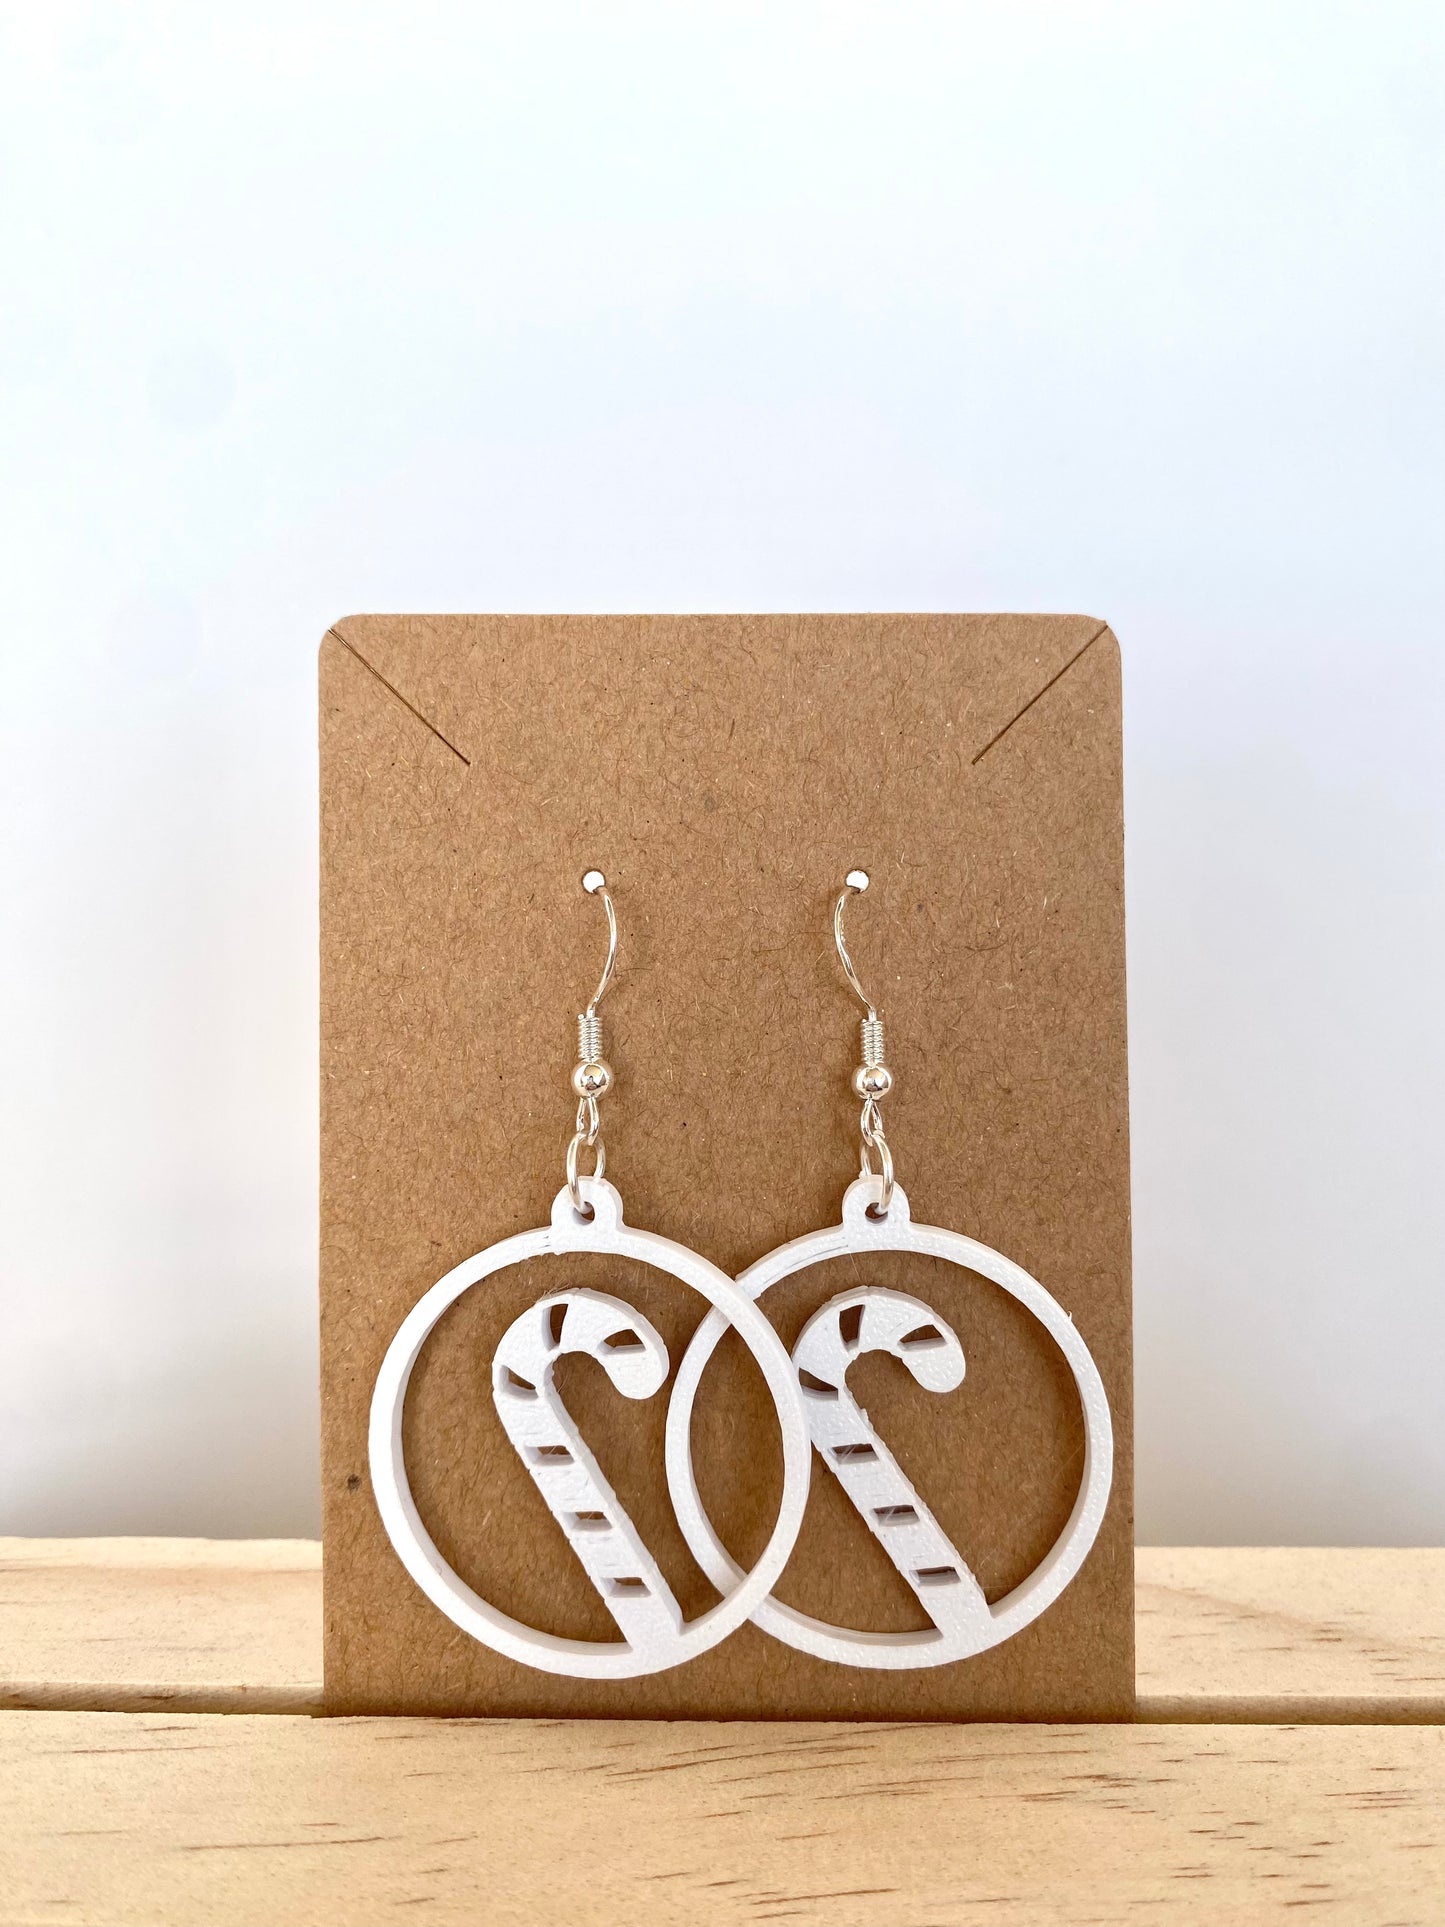 Circle Candy Cane Earrings in white.